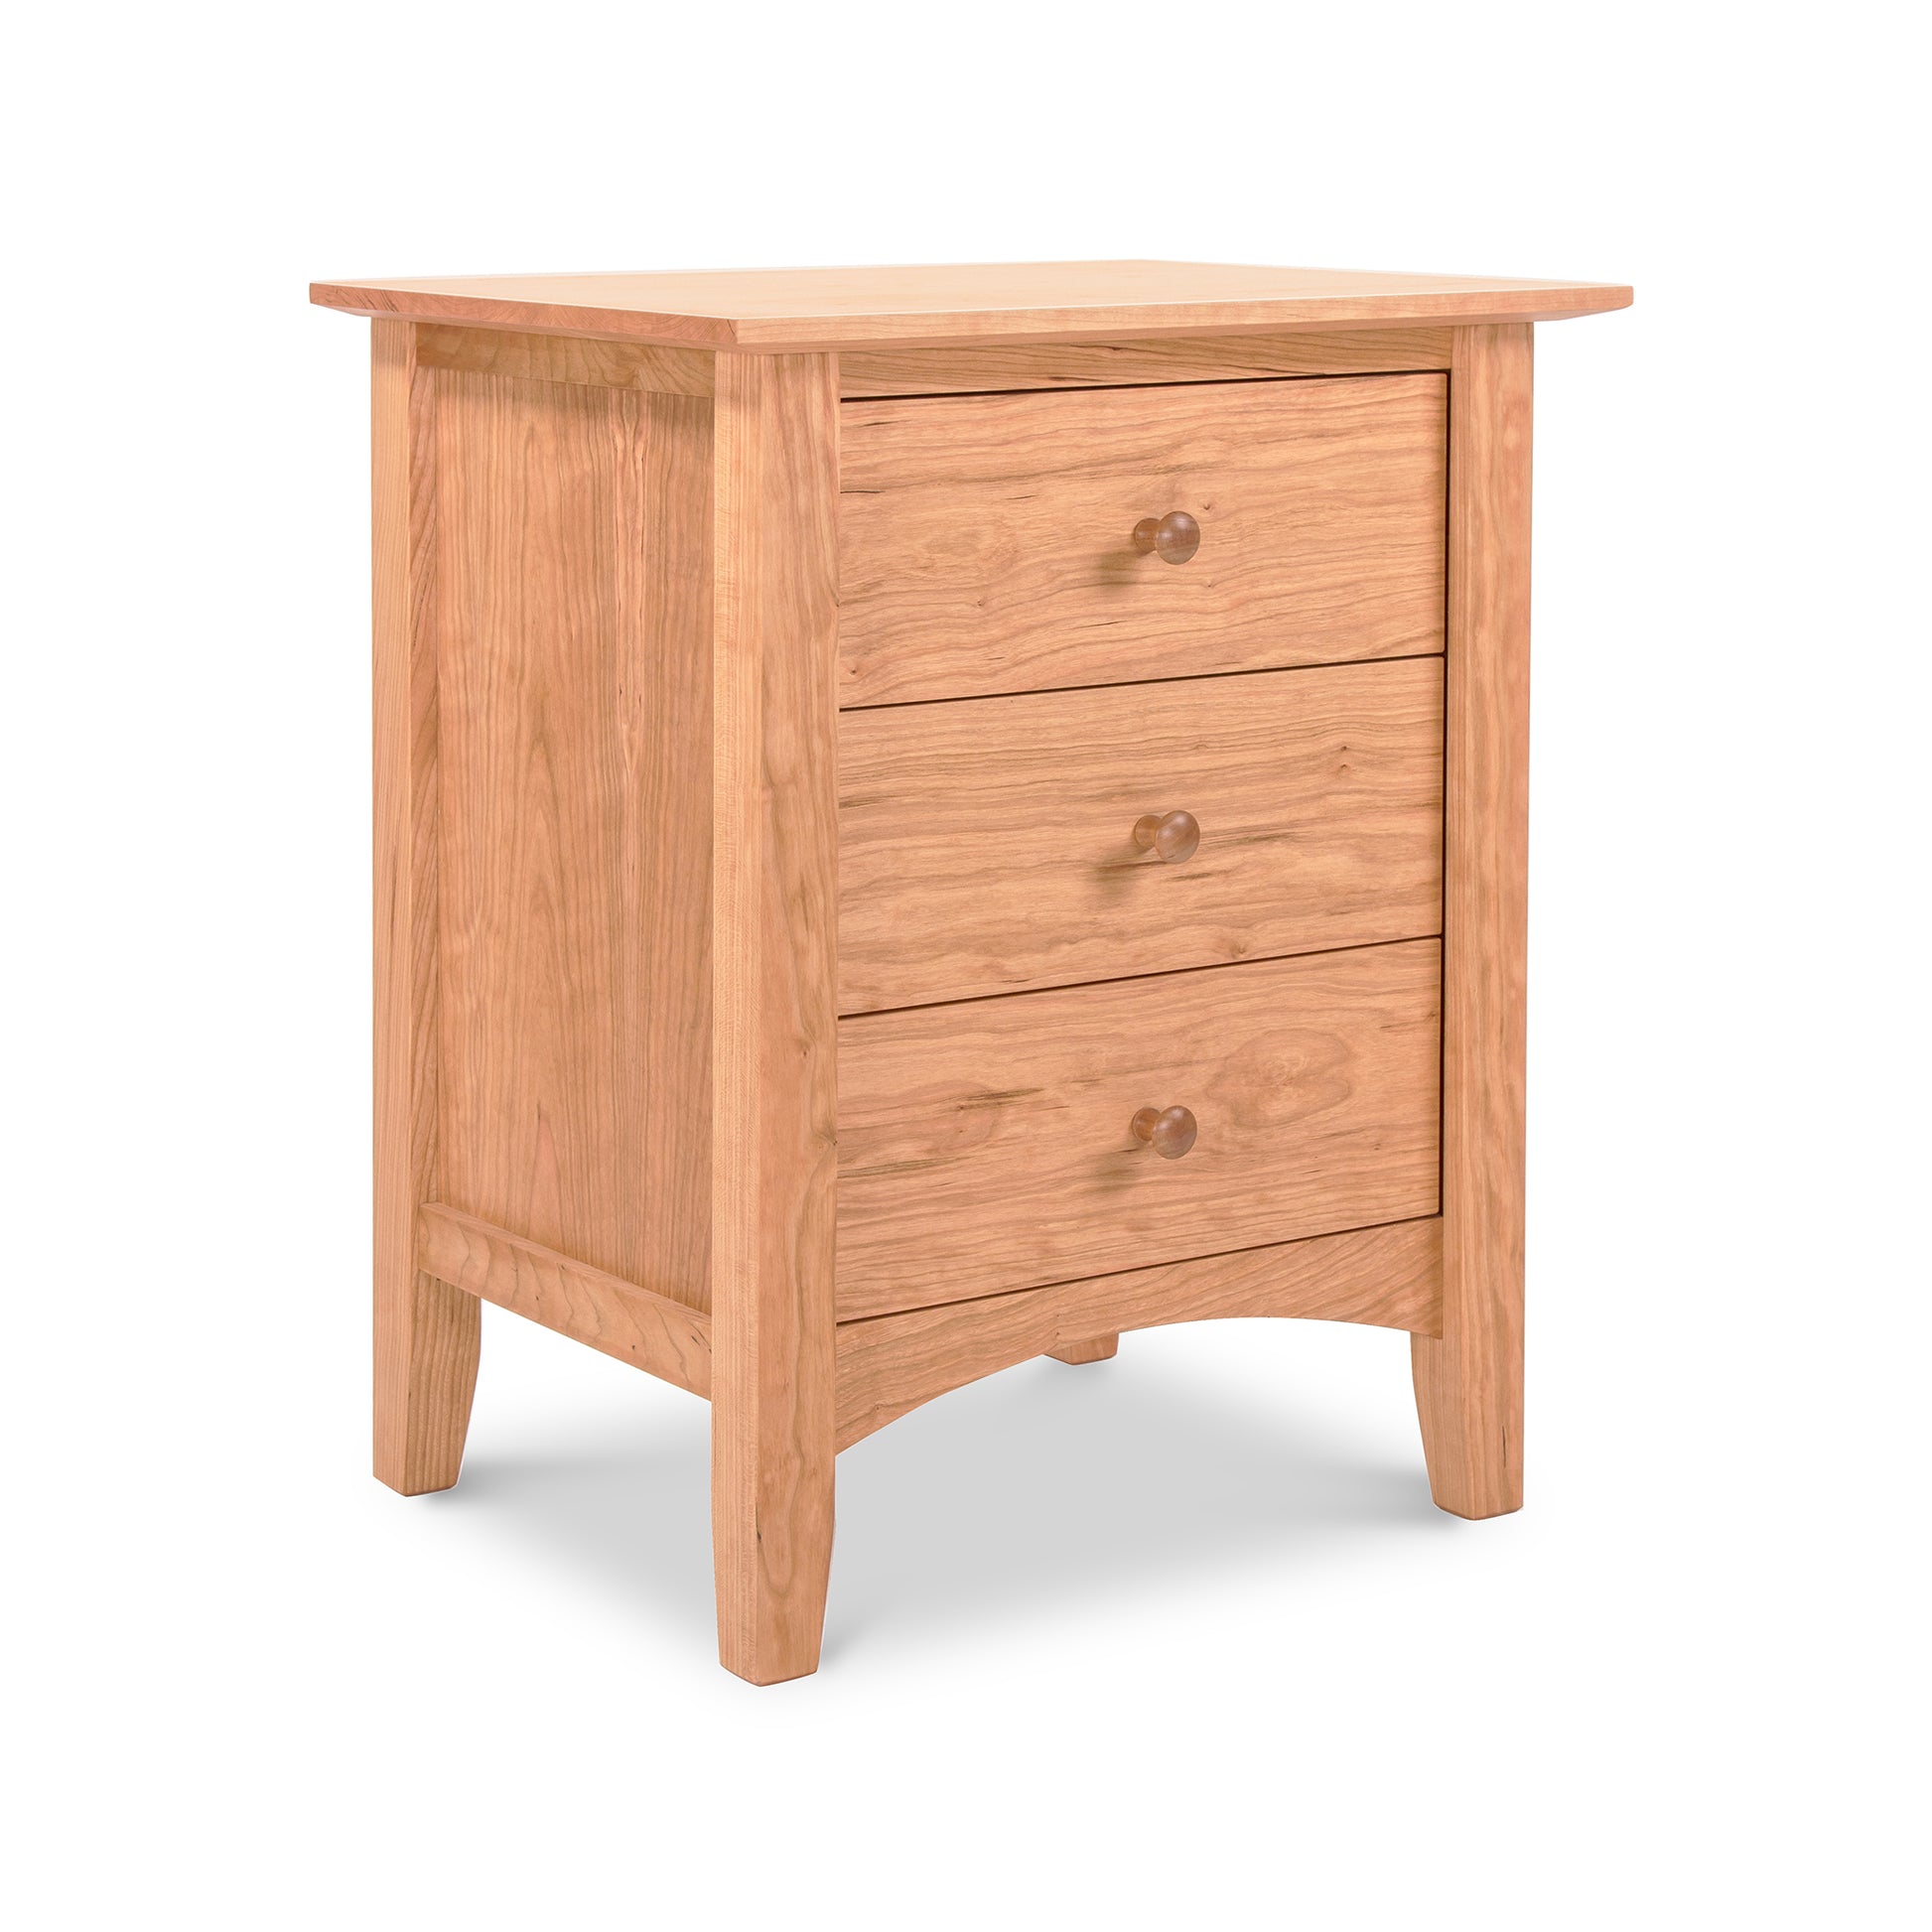 A handmade wooden American Shaker 3-Drawer Nightstand, showcasing Vermont craftsmanship and inspired by Maple Corner Woodworks design.